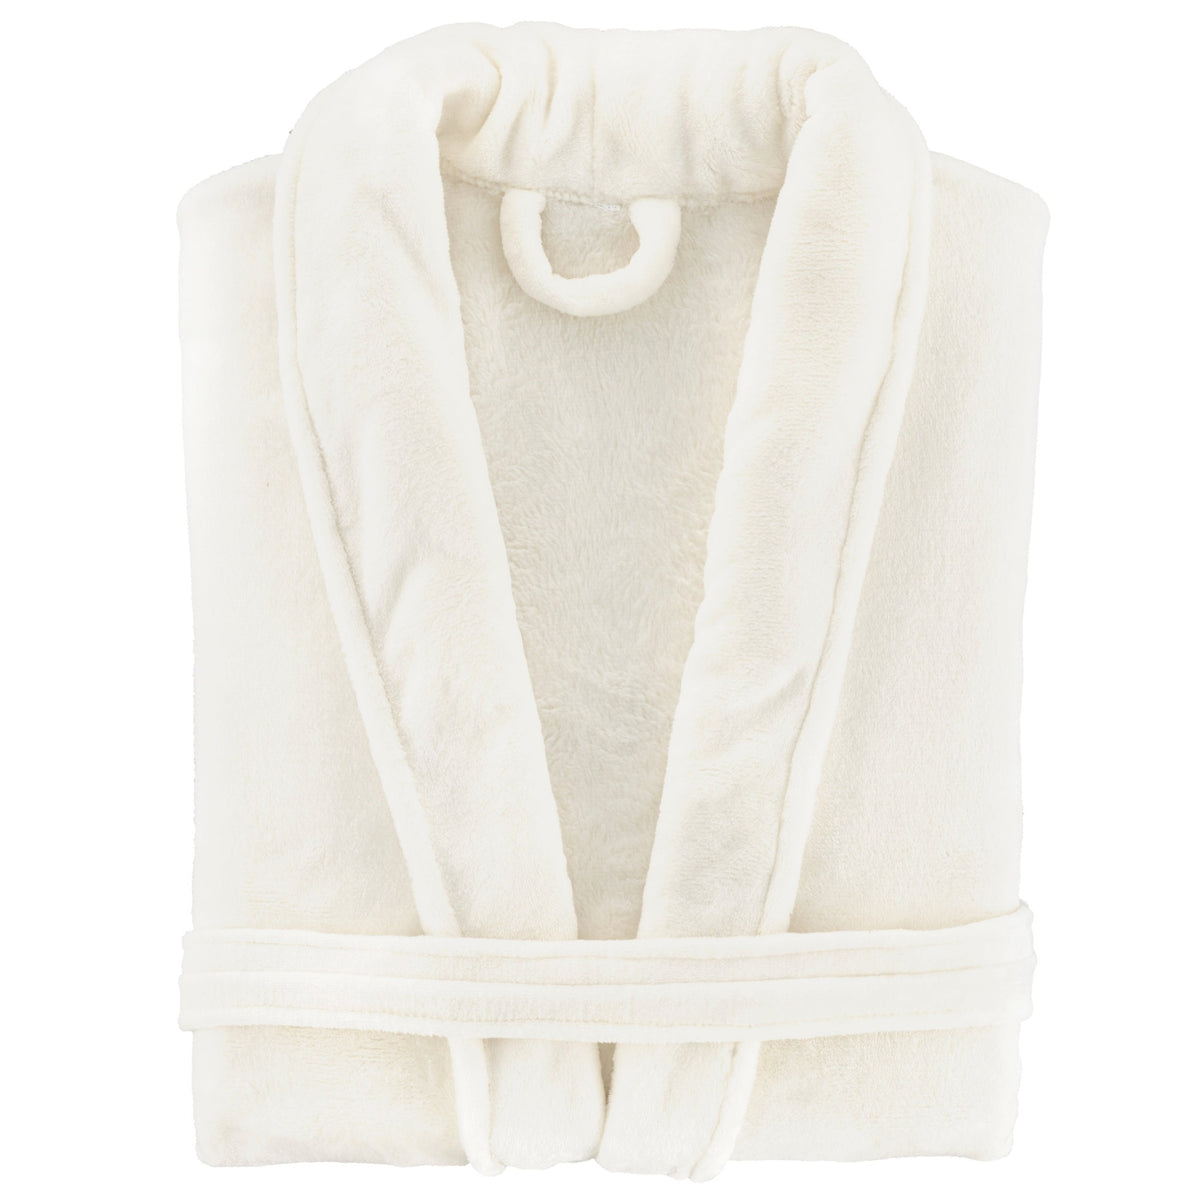 Folded Image of Pine Cone Hill Sheepy Fleece 2.0 Robe in Color Ivory